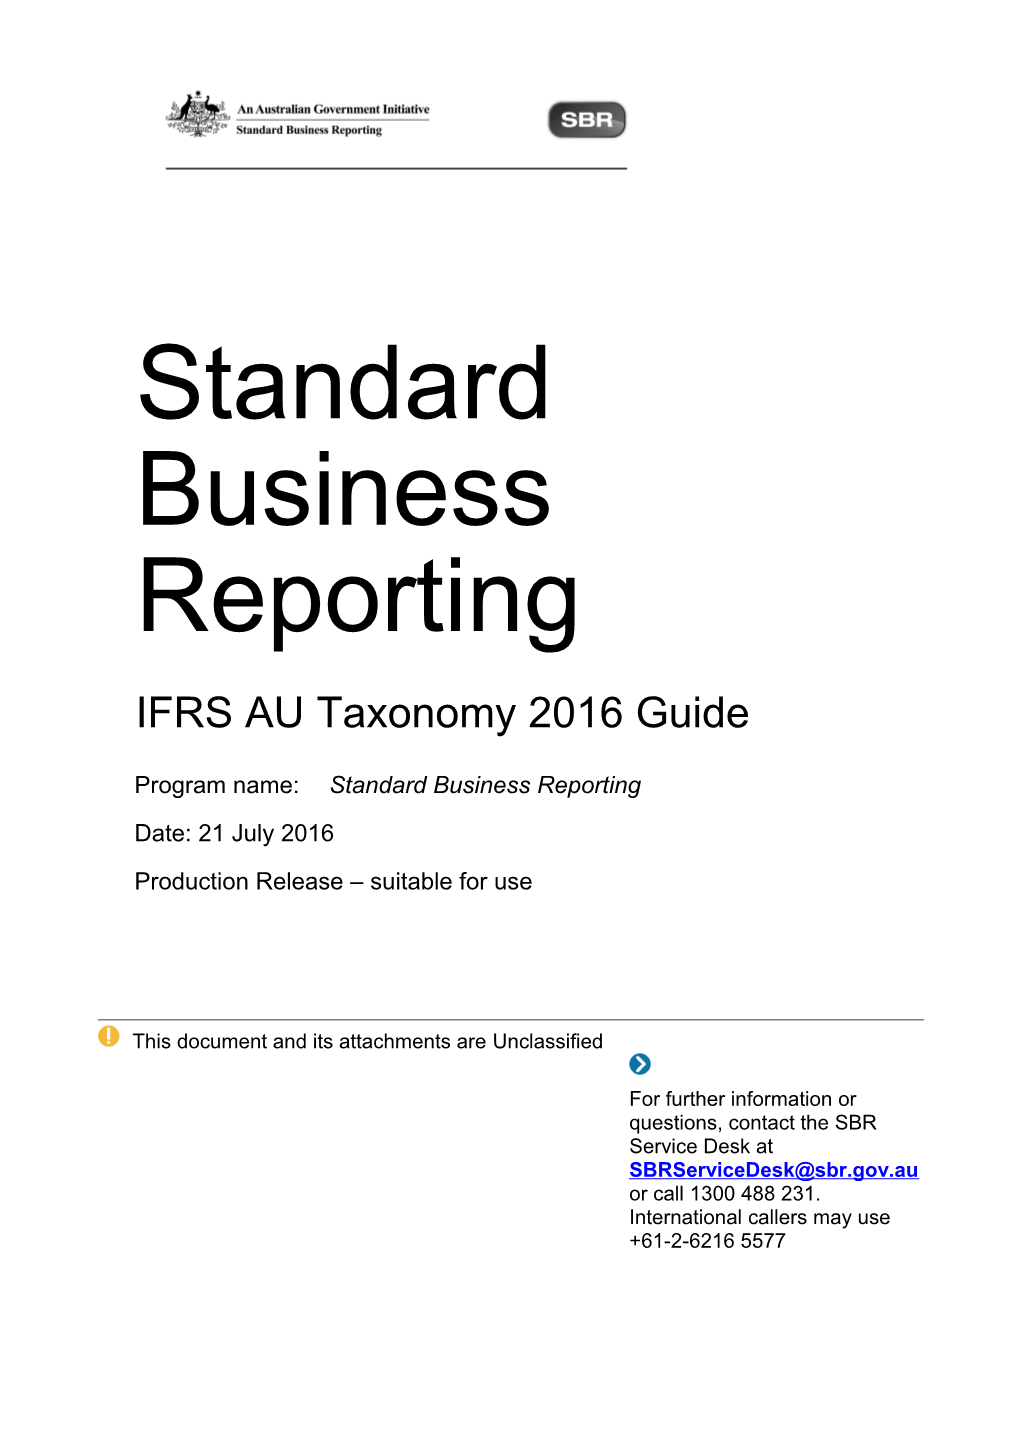 IFRS AU Taxonomy 2012 Guide